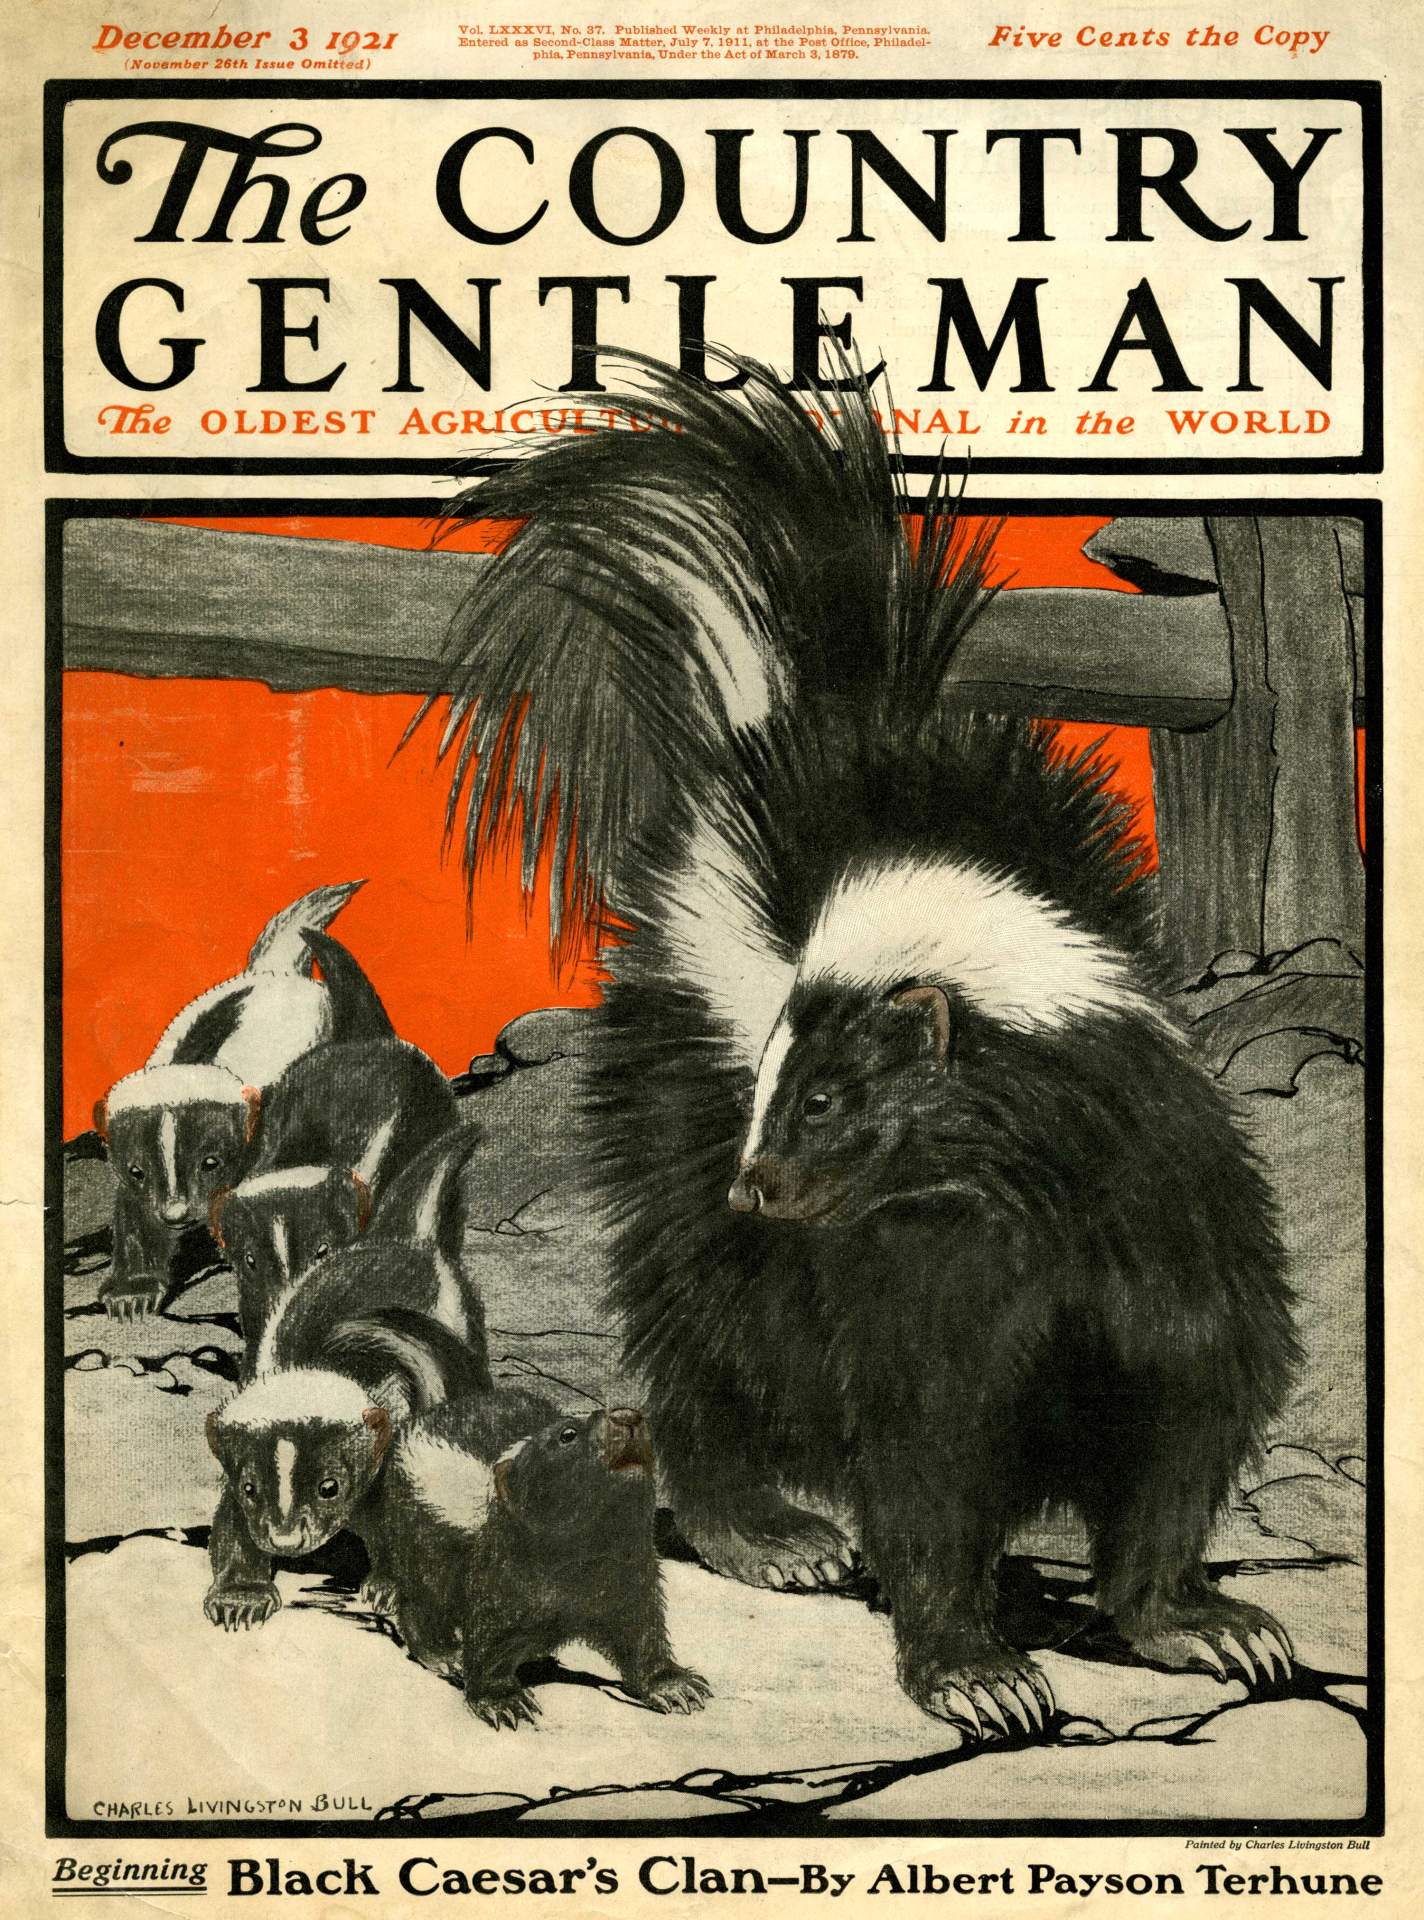 Cover Illustration for The Country Gentleman